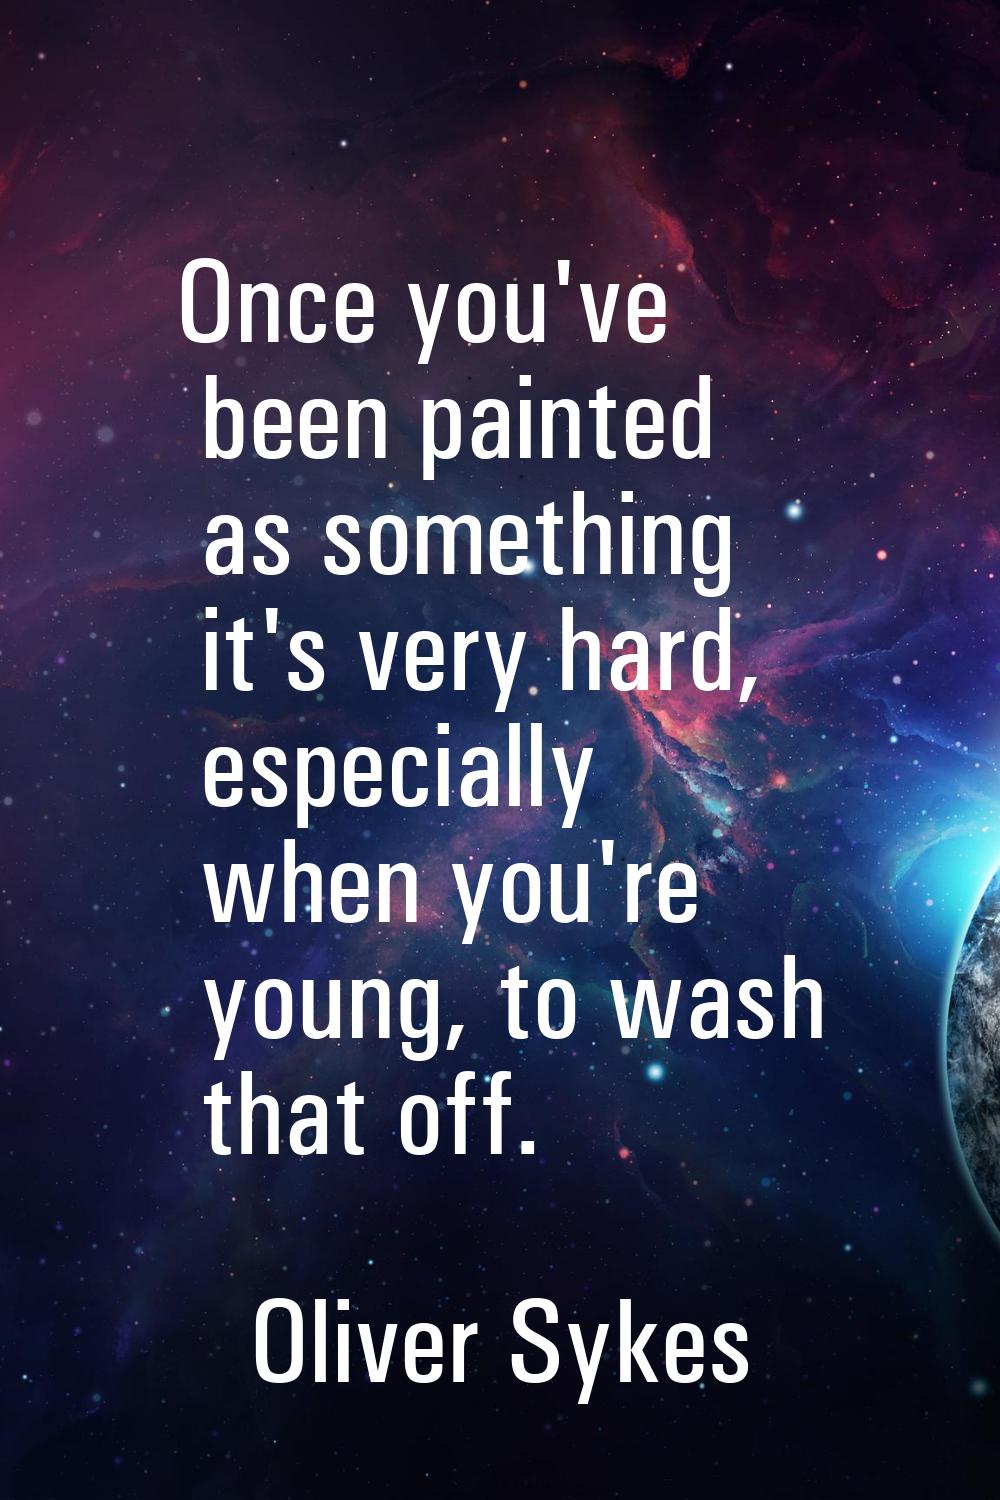 Once you've been painted as something it's very hard, especially when you're young, to wash that of